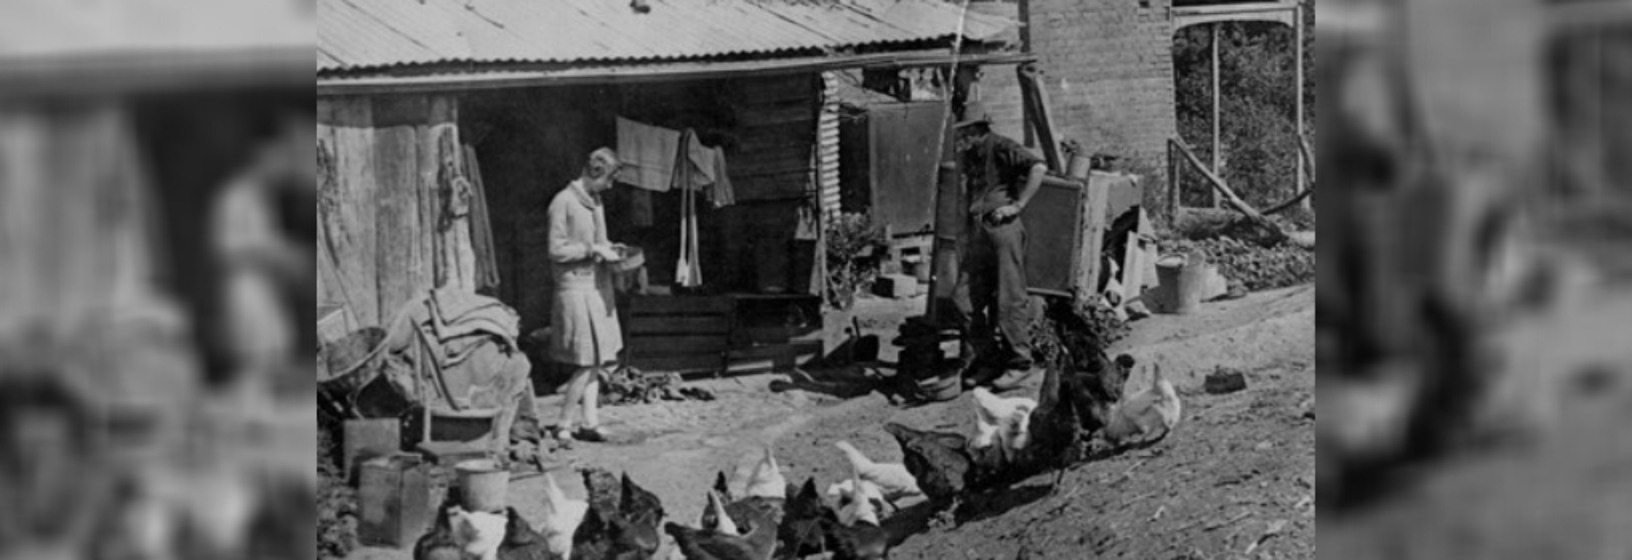 Woman and man feeding chickens